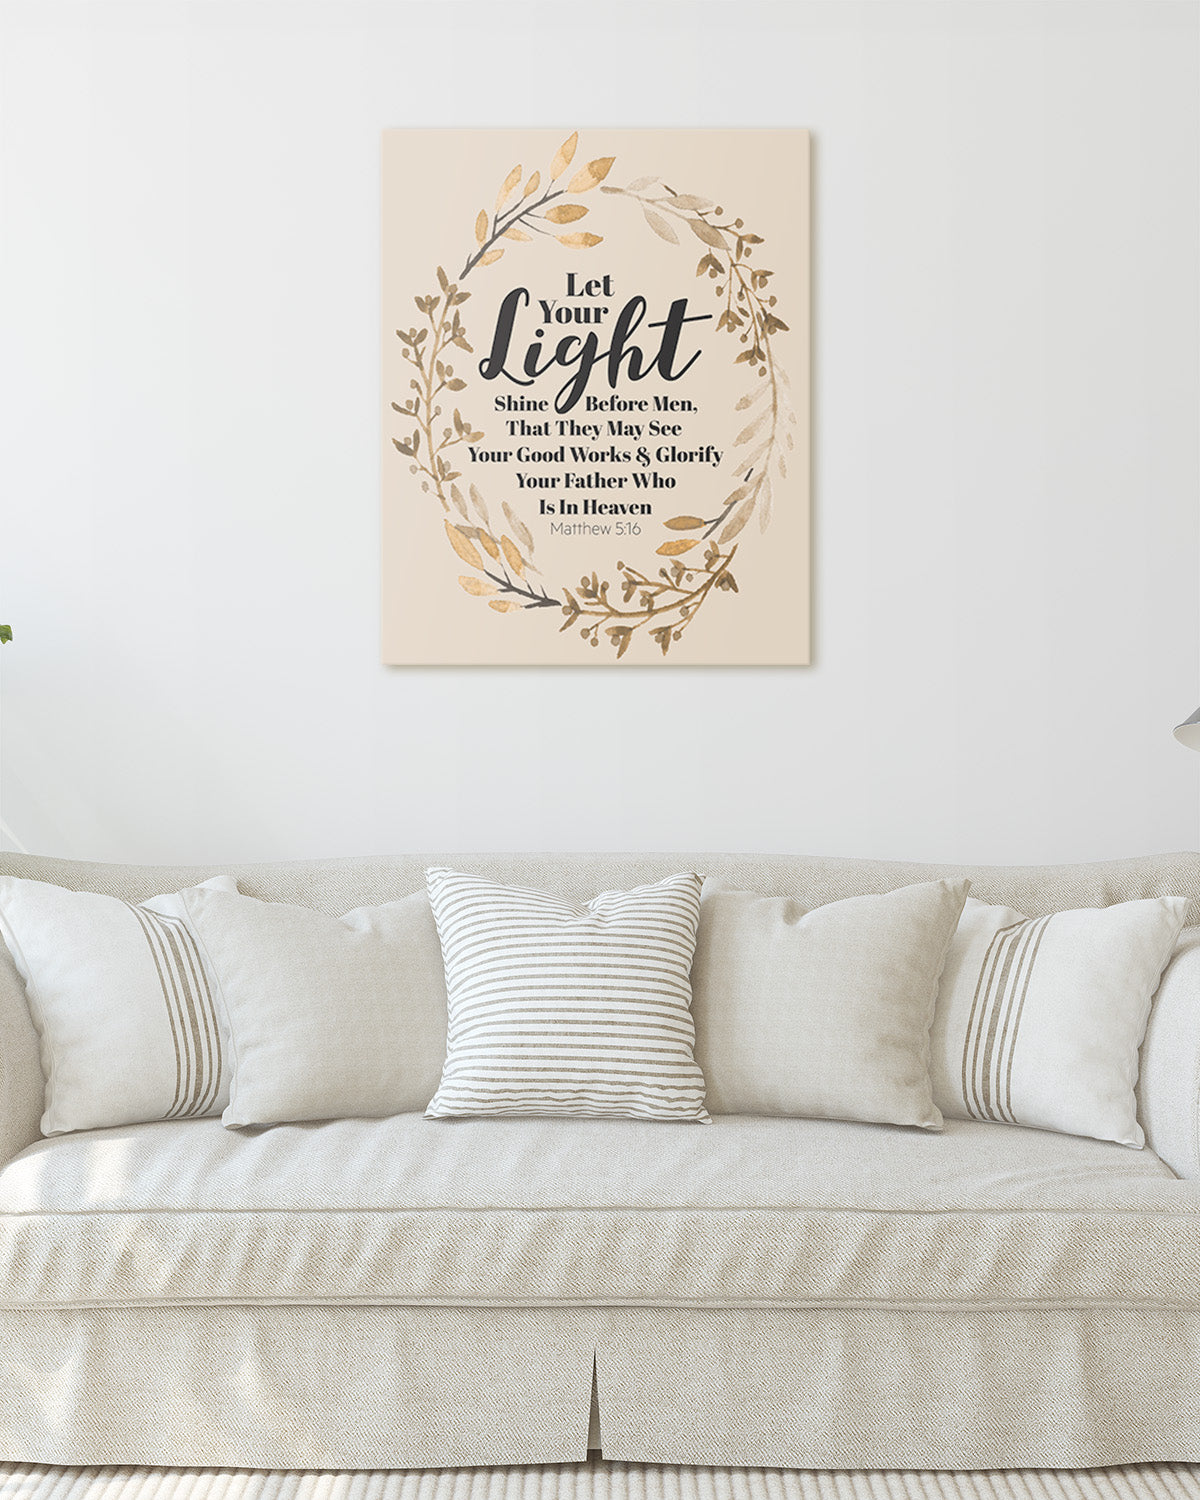 Govivo Let Your Light Shine Matthew 5:16 bible verse decor - Christian inspirational wall decor - Scripture quote home decor gifts for women, girls, men and boys